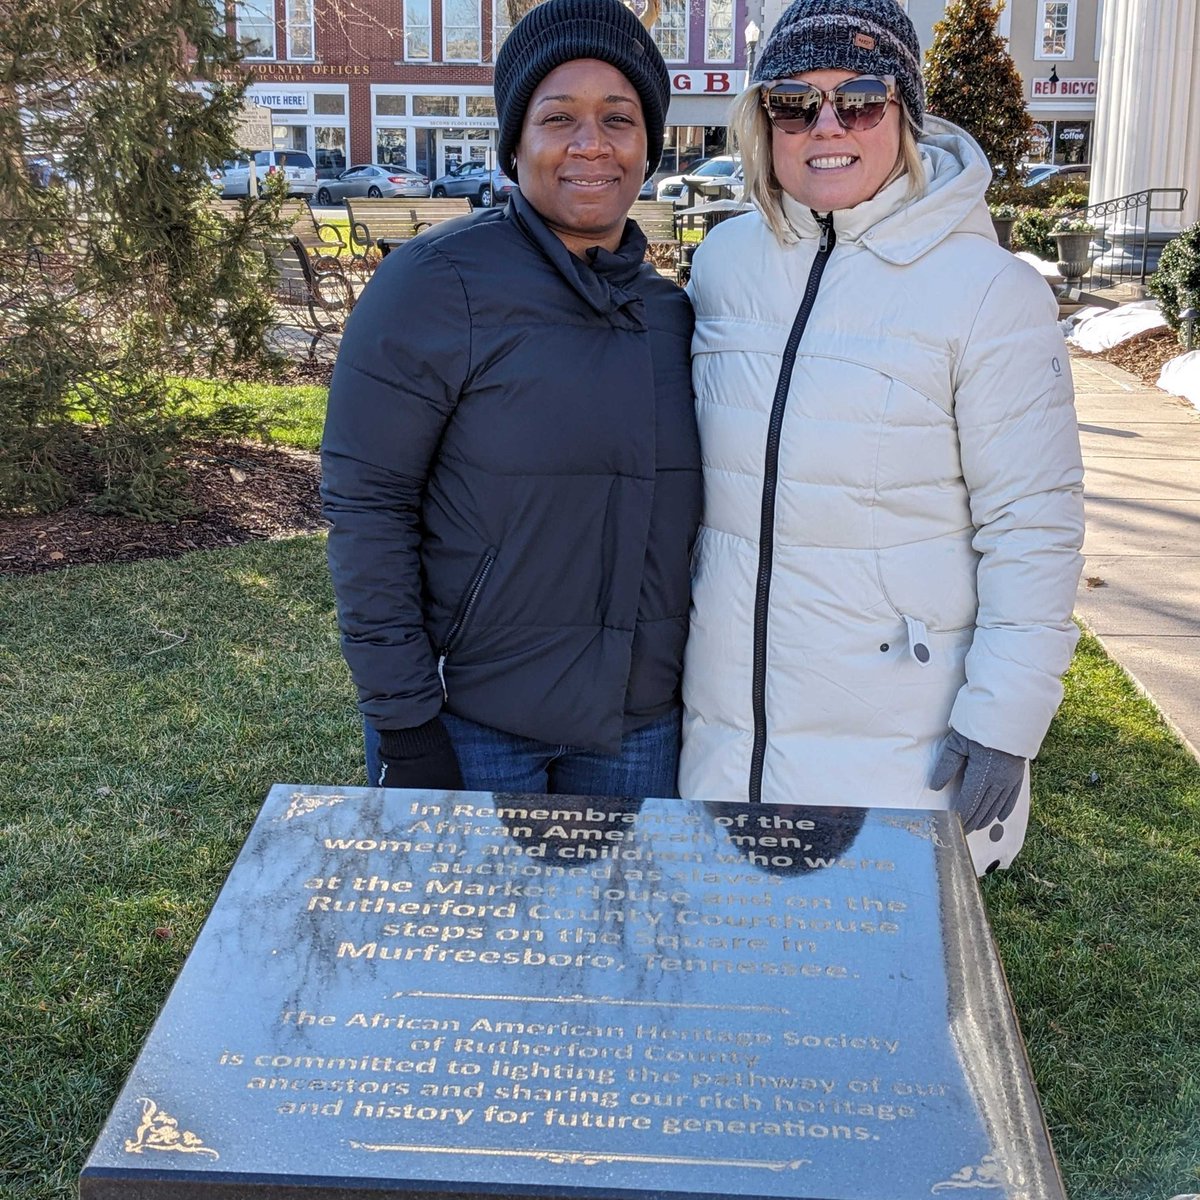 Members of Laura's 'kitchen cabinet' Leslie Marshall and Christa Rembold at the unveiling of the monument honoring enslaved sold on our very own courthouse steps. #murfreesborotn #AllIn4TN #ForThePeople #rutherfordcounty